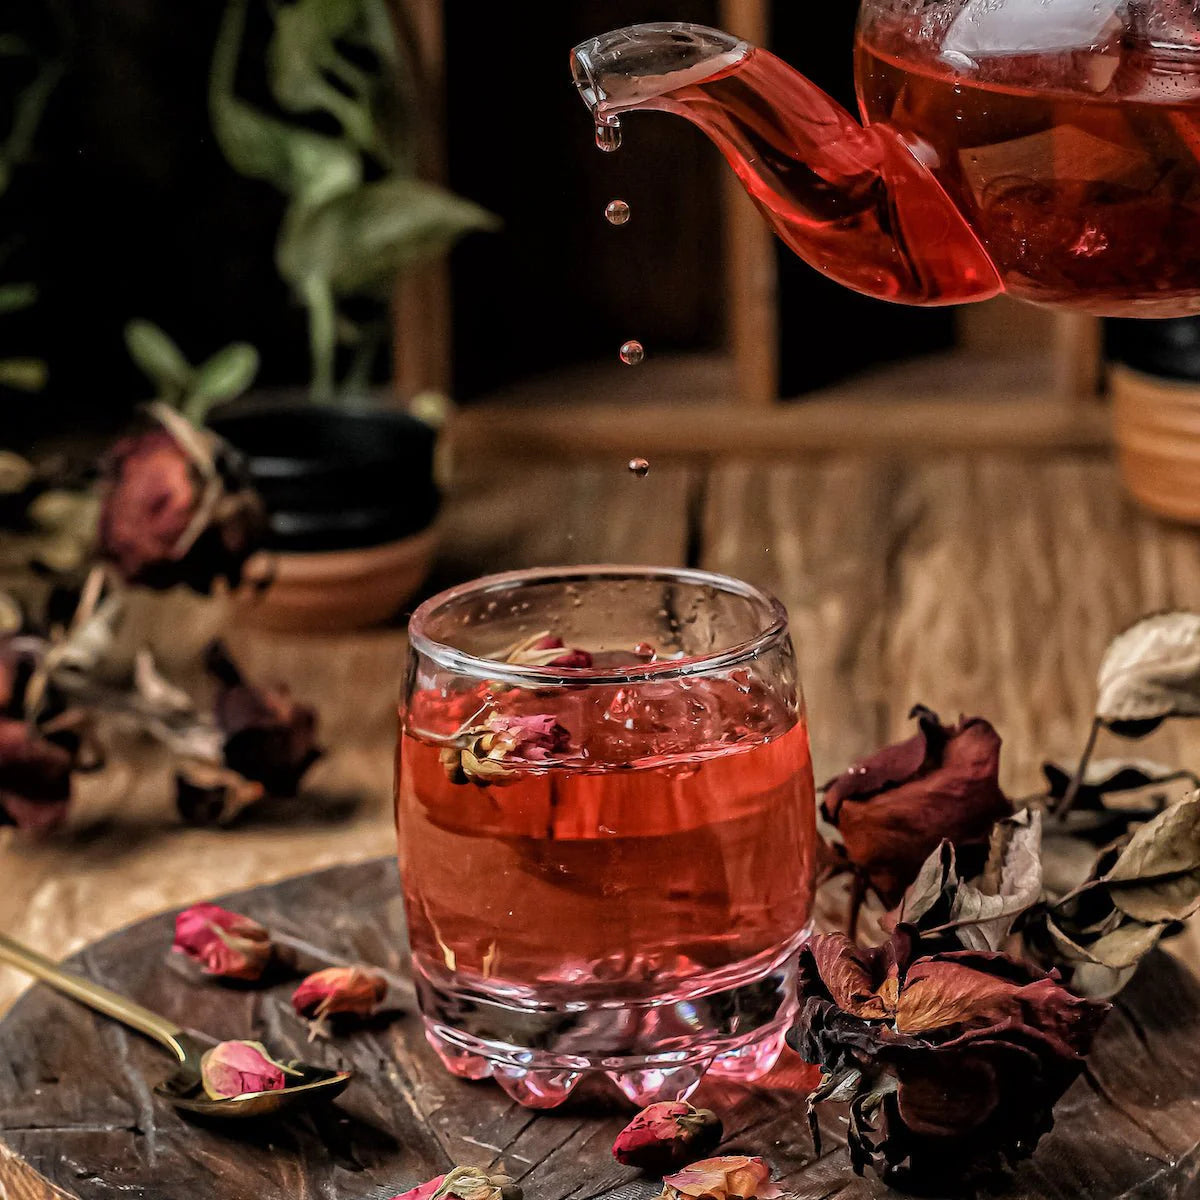 A glass teapot pours red tea into a clear glass with a wooden surface underneath. Dried rose petals are scattered around the board, with some inside the glass and on a spoon nearby. The background includes blurred plants in small pots.